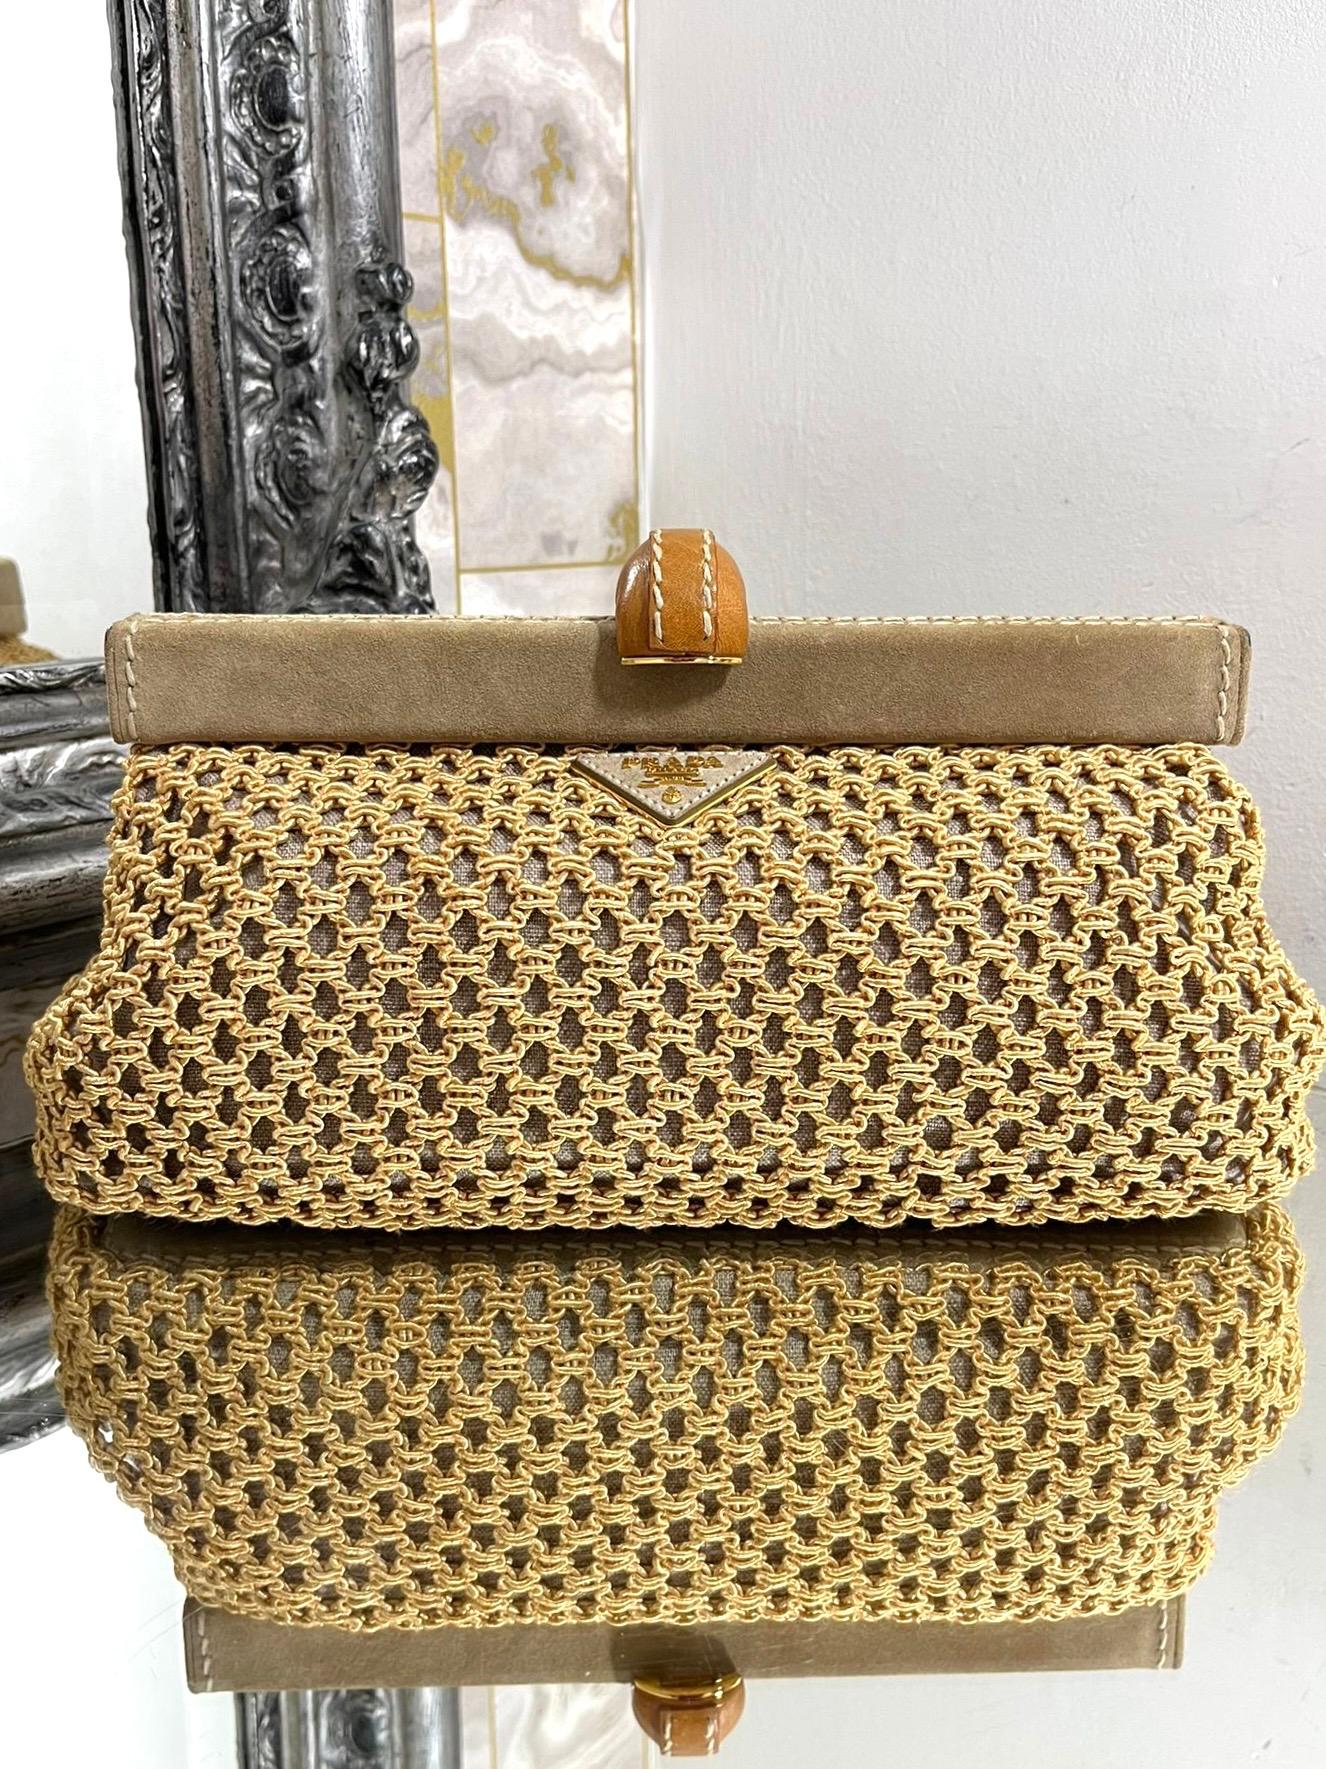 Prada Suede & Raffia Clutch Bag

Beige woven pouch bag with signature logo triangle having the 'PRADA' logo in 

gold metal lettering. Suede trim with fold over leather closure.

Size - Height 16cm, Width 30cm, Depth 10cm

Condition - Good (Some